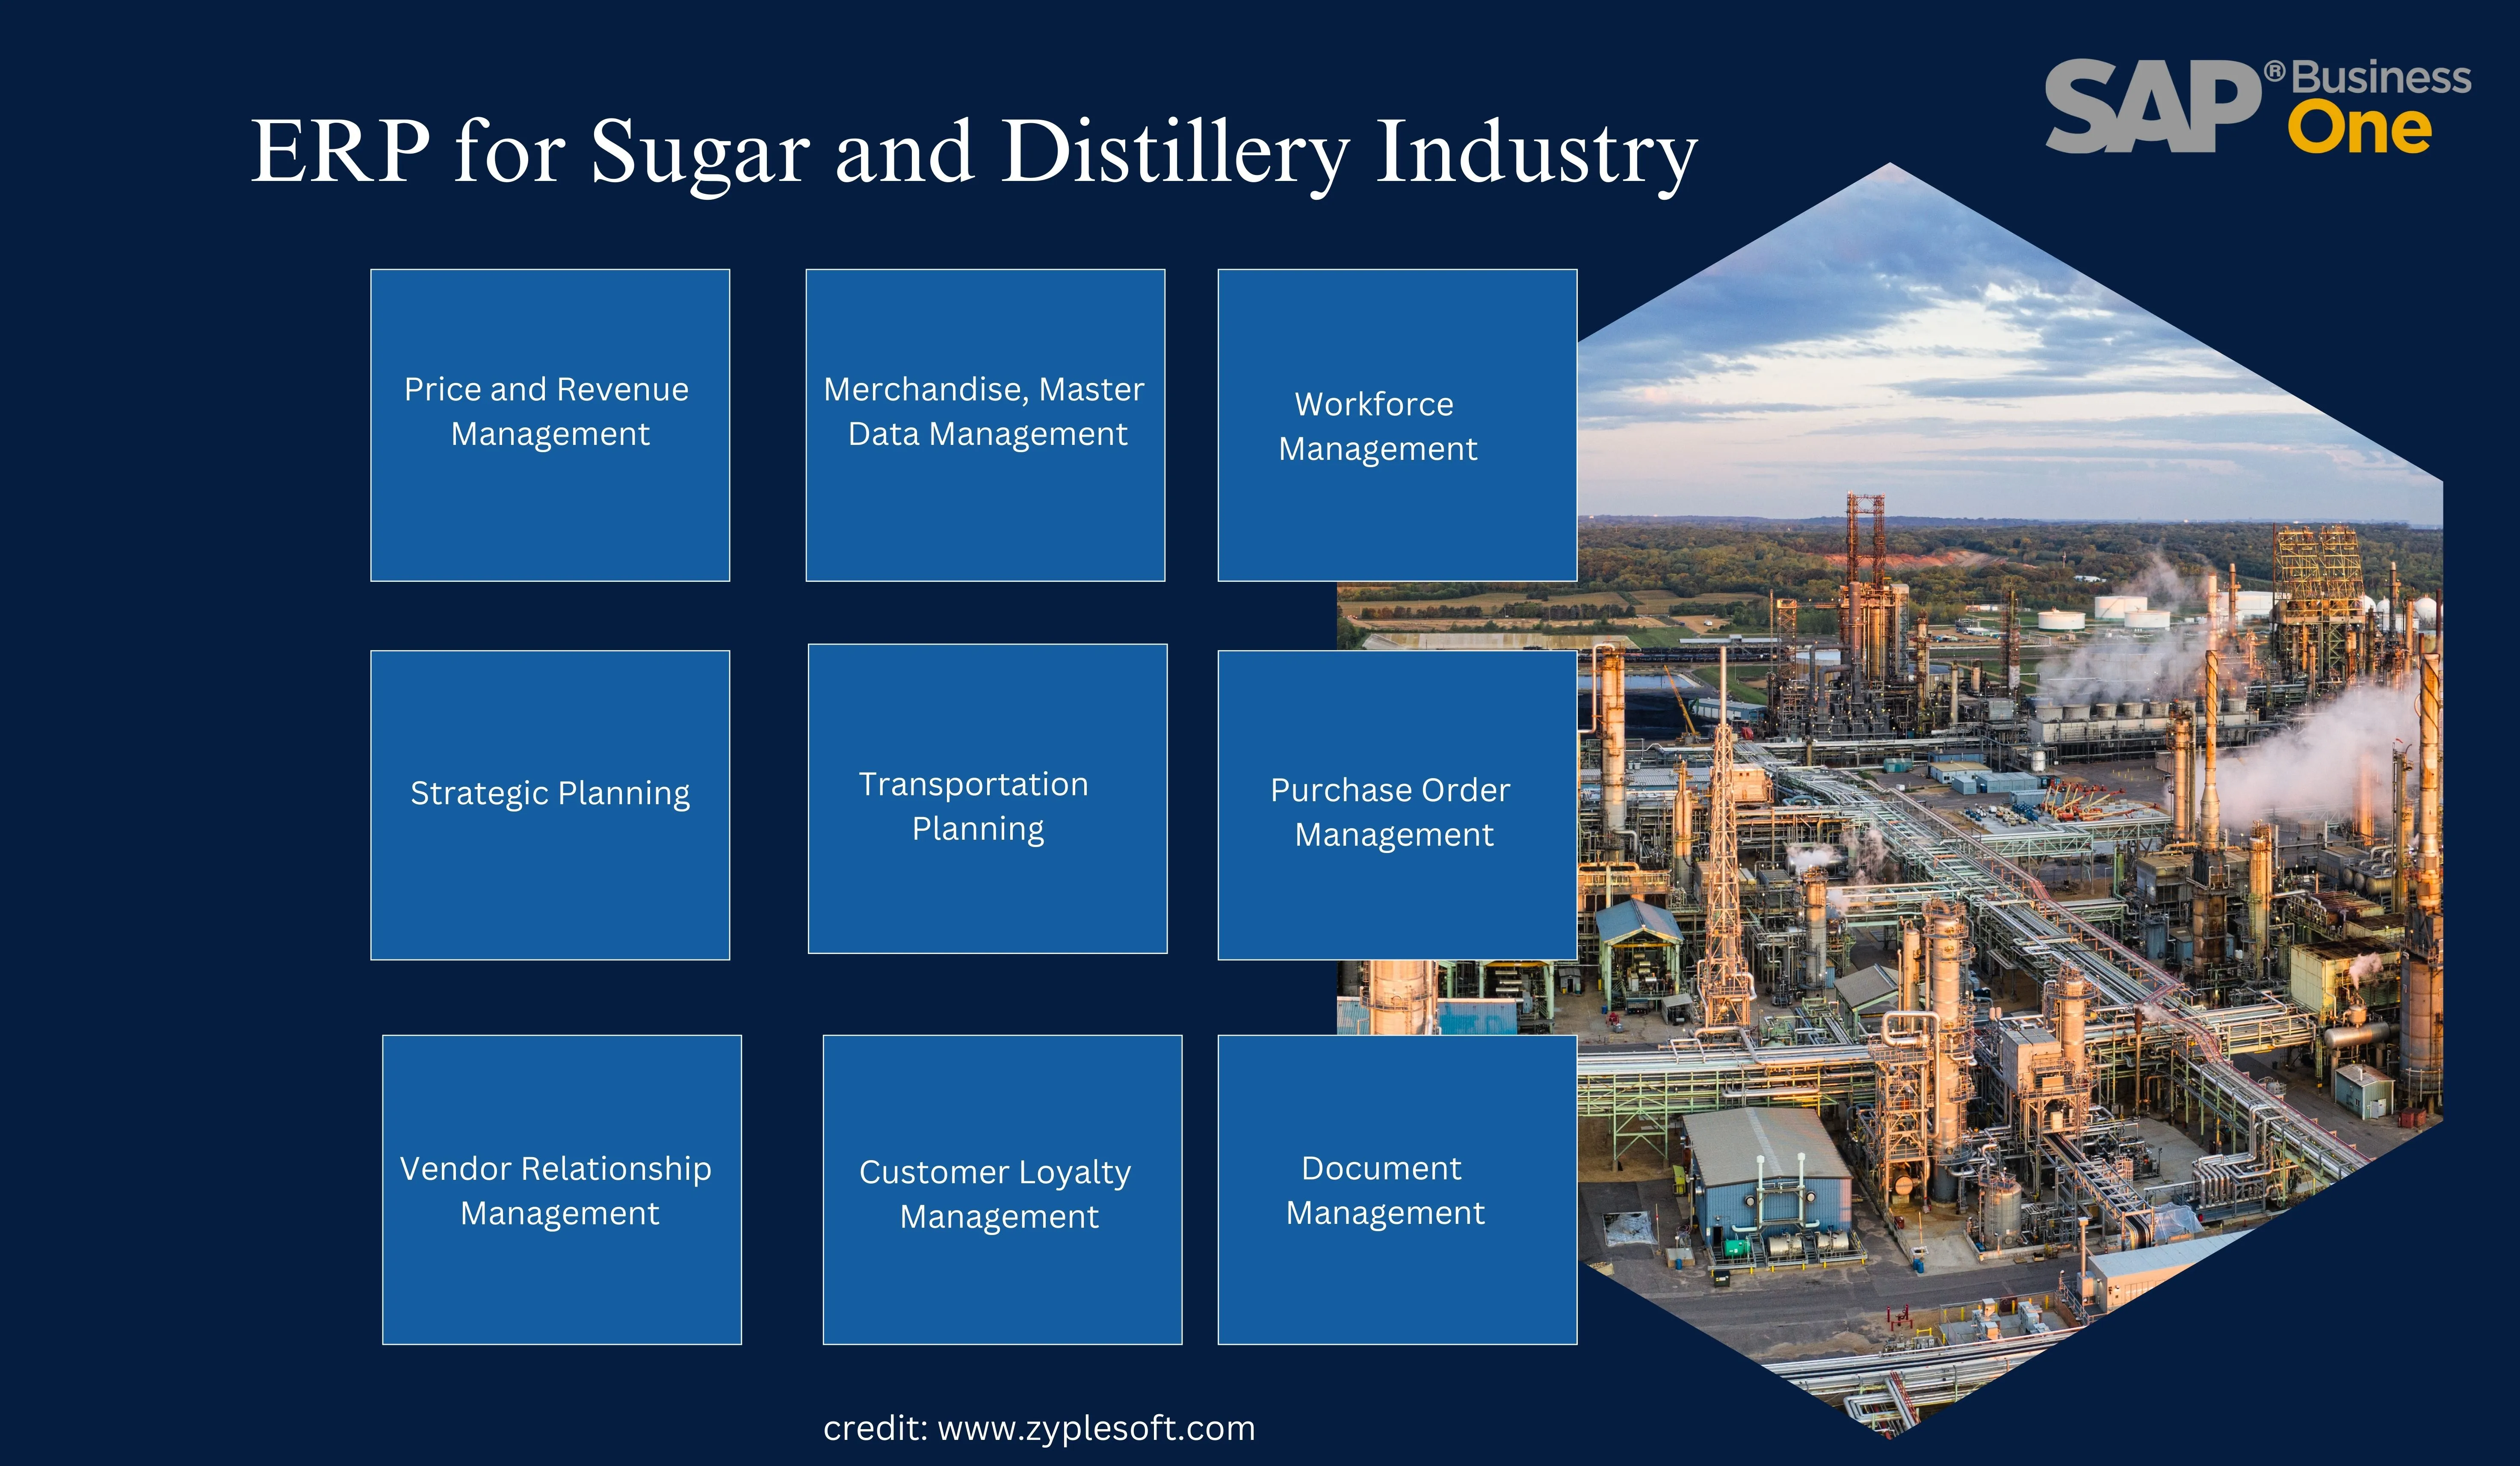 SAP Business One ERP for Sugar and Distillery industry